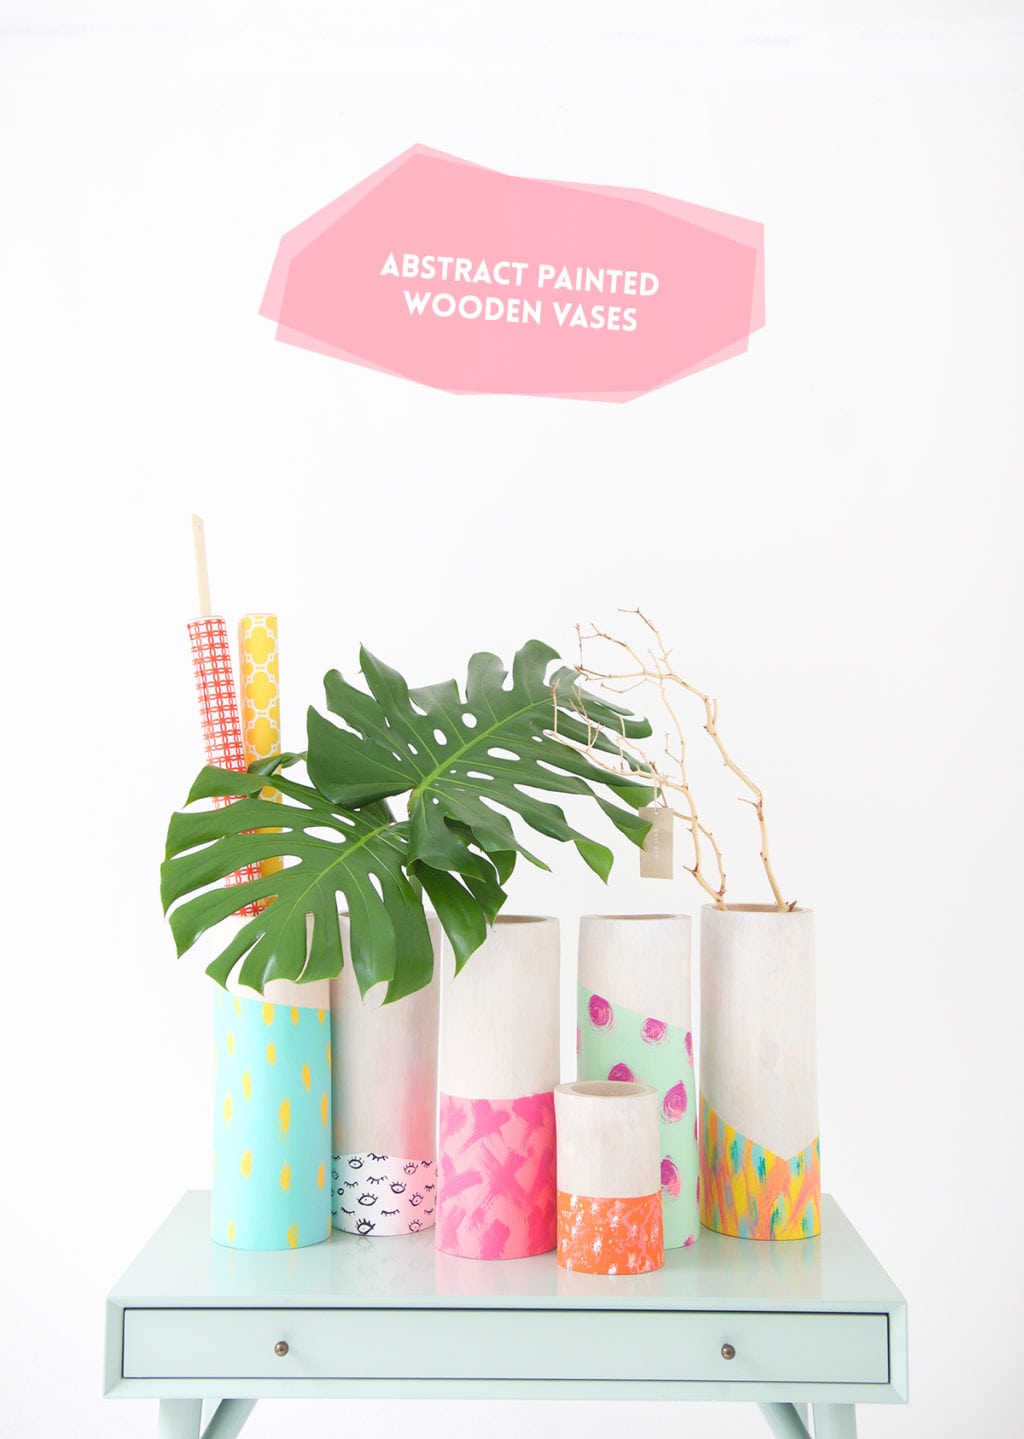 DIY Painted Wooden Vases are super simple to create with just basic supplies and a little imagination. This affordable craft will bring so much creativity into your home decor.